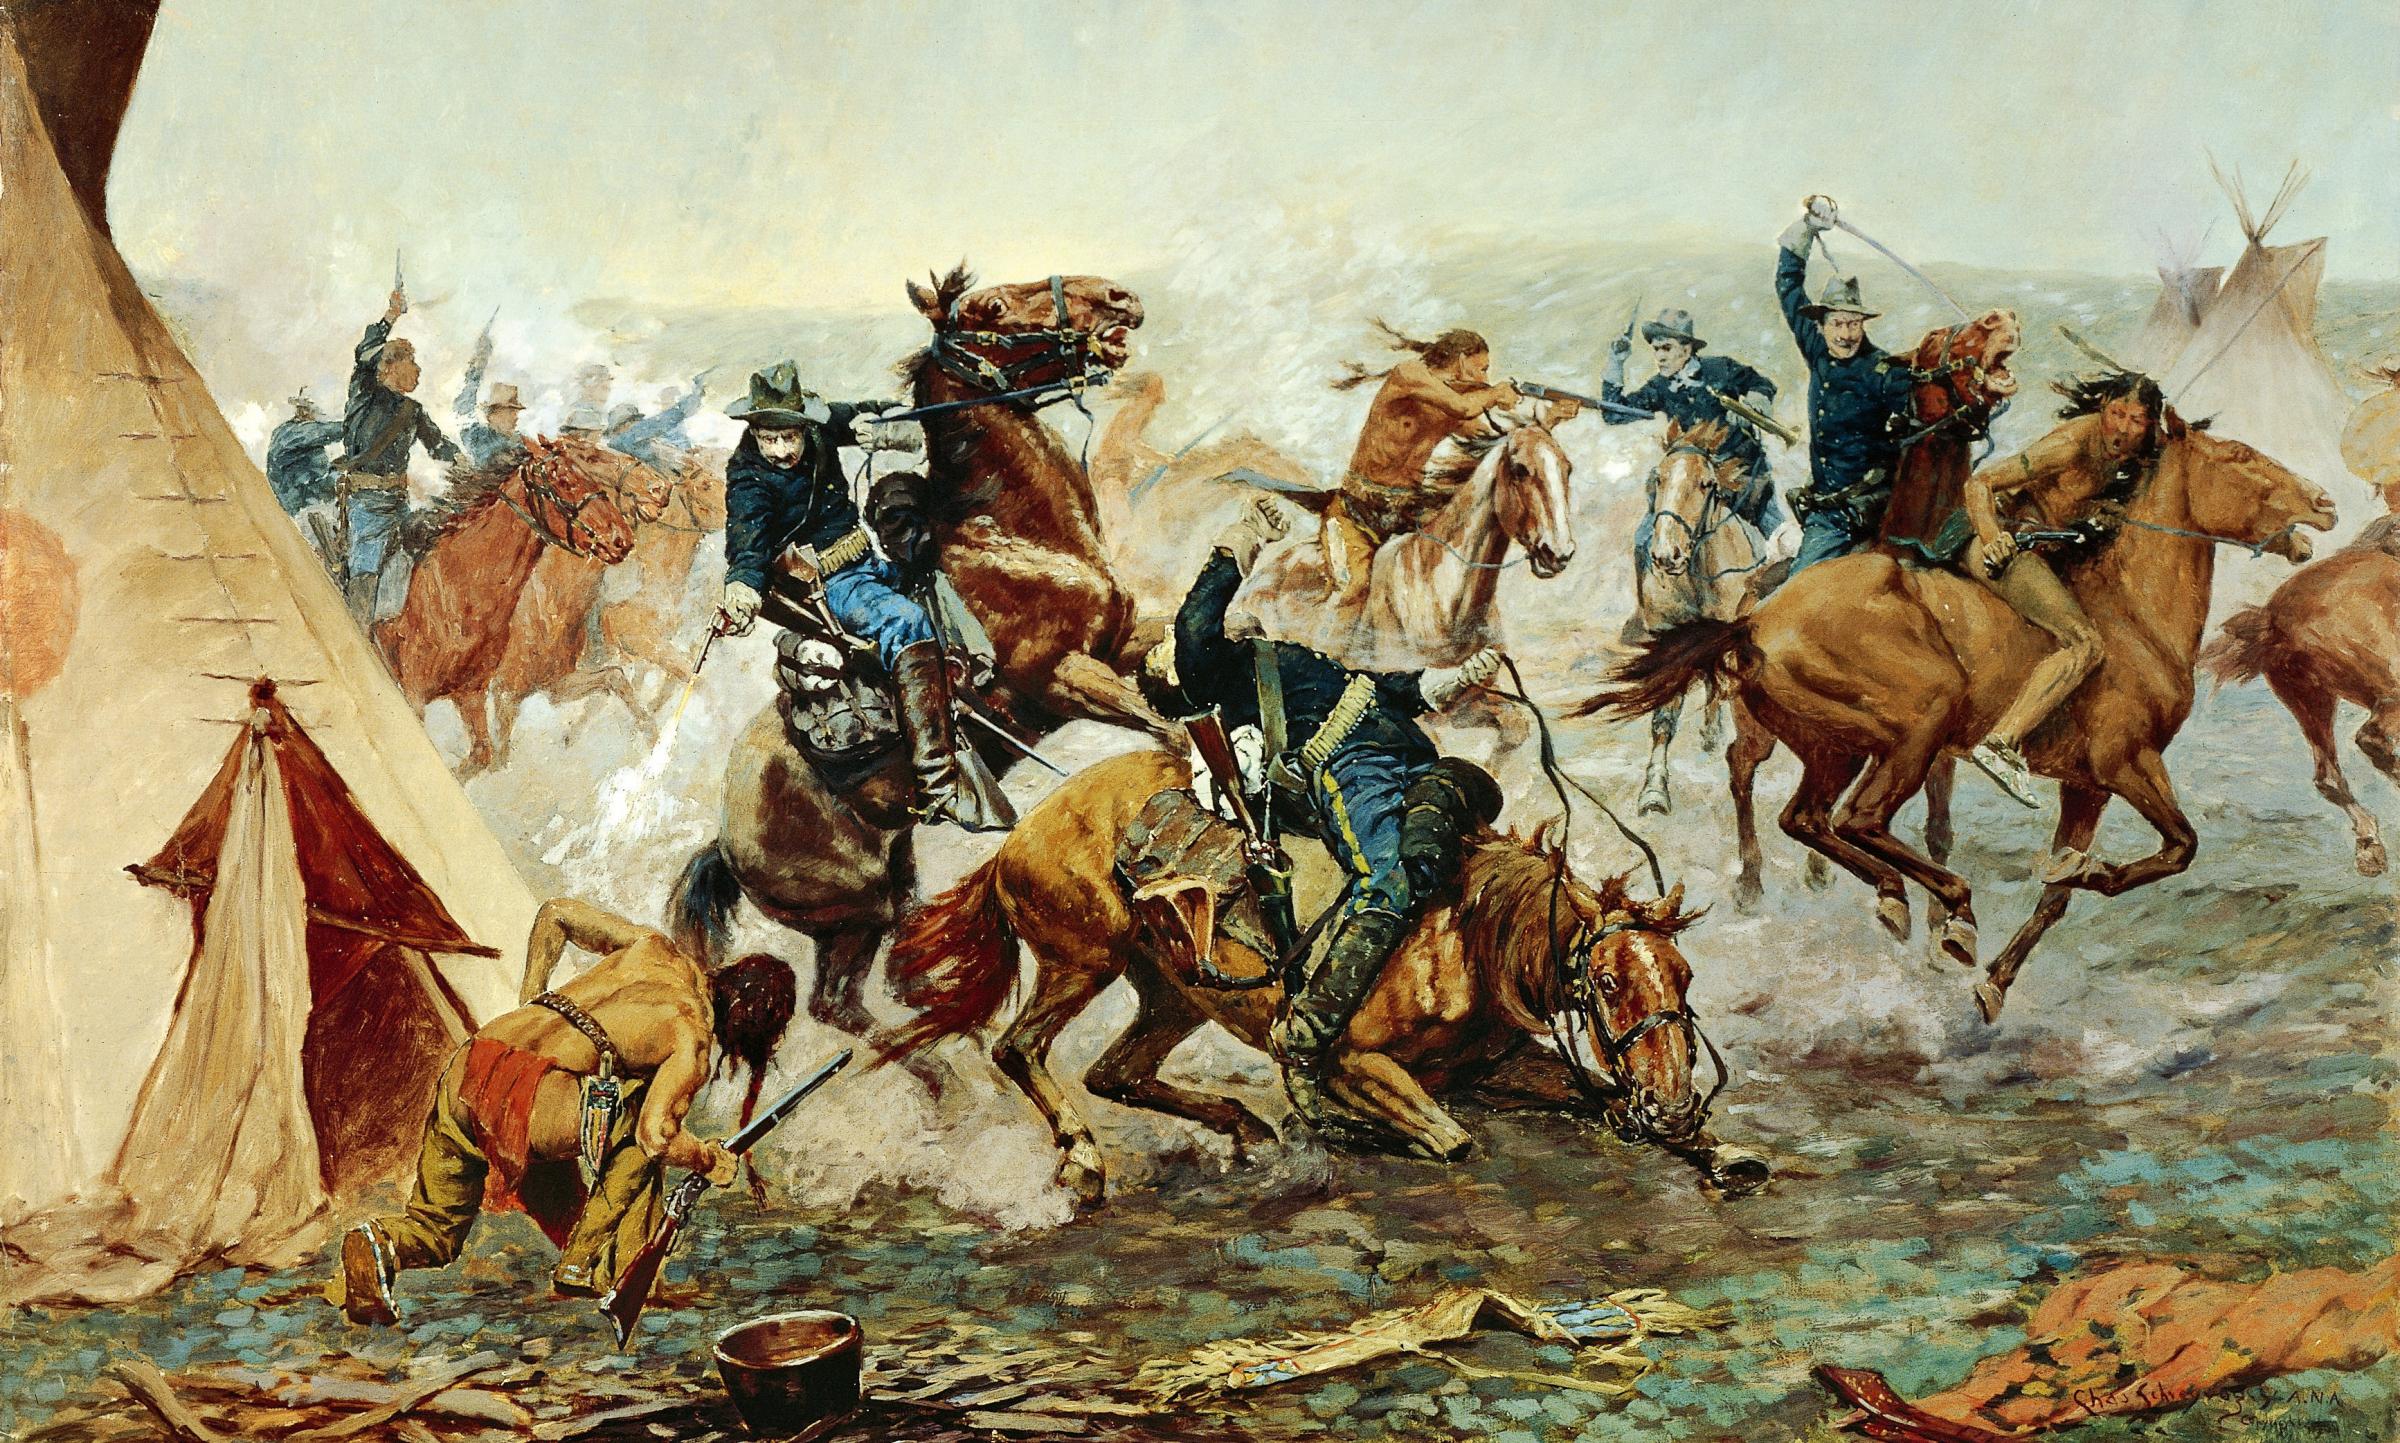 General Custer and the Massacre of Washita River | The National